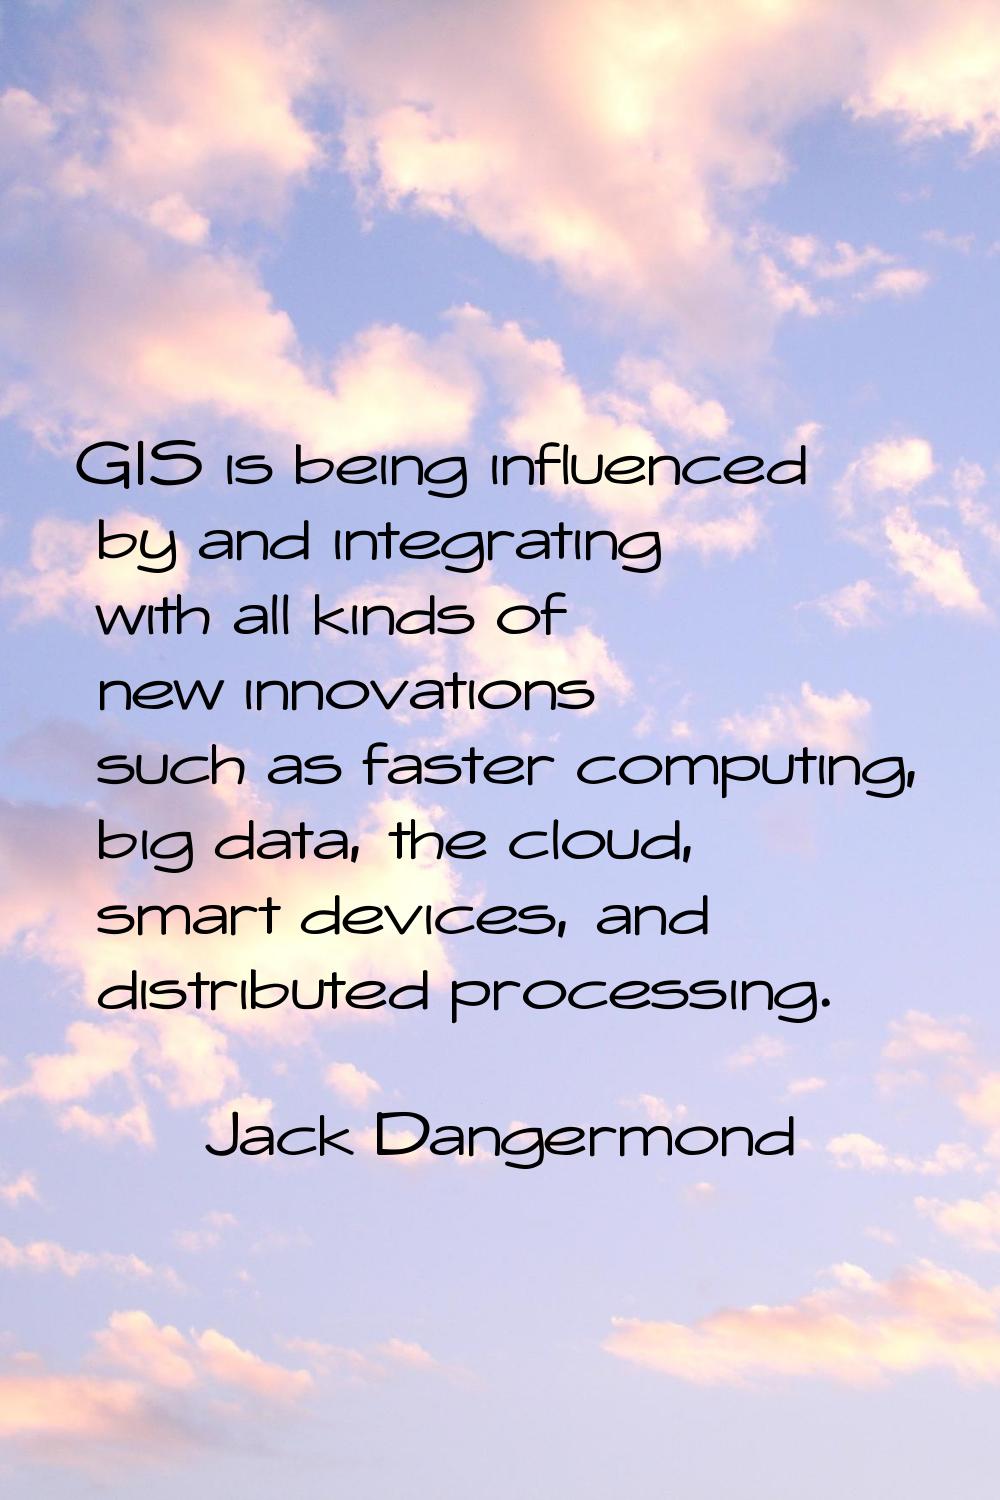 GIS is being influenced by and integrating with all kinds of new innovations such as faster computi